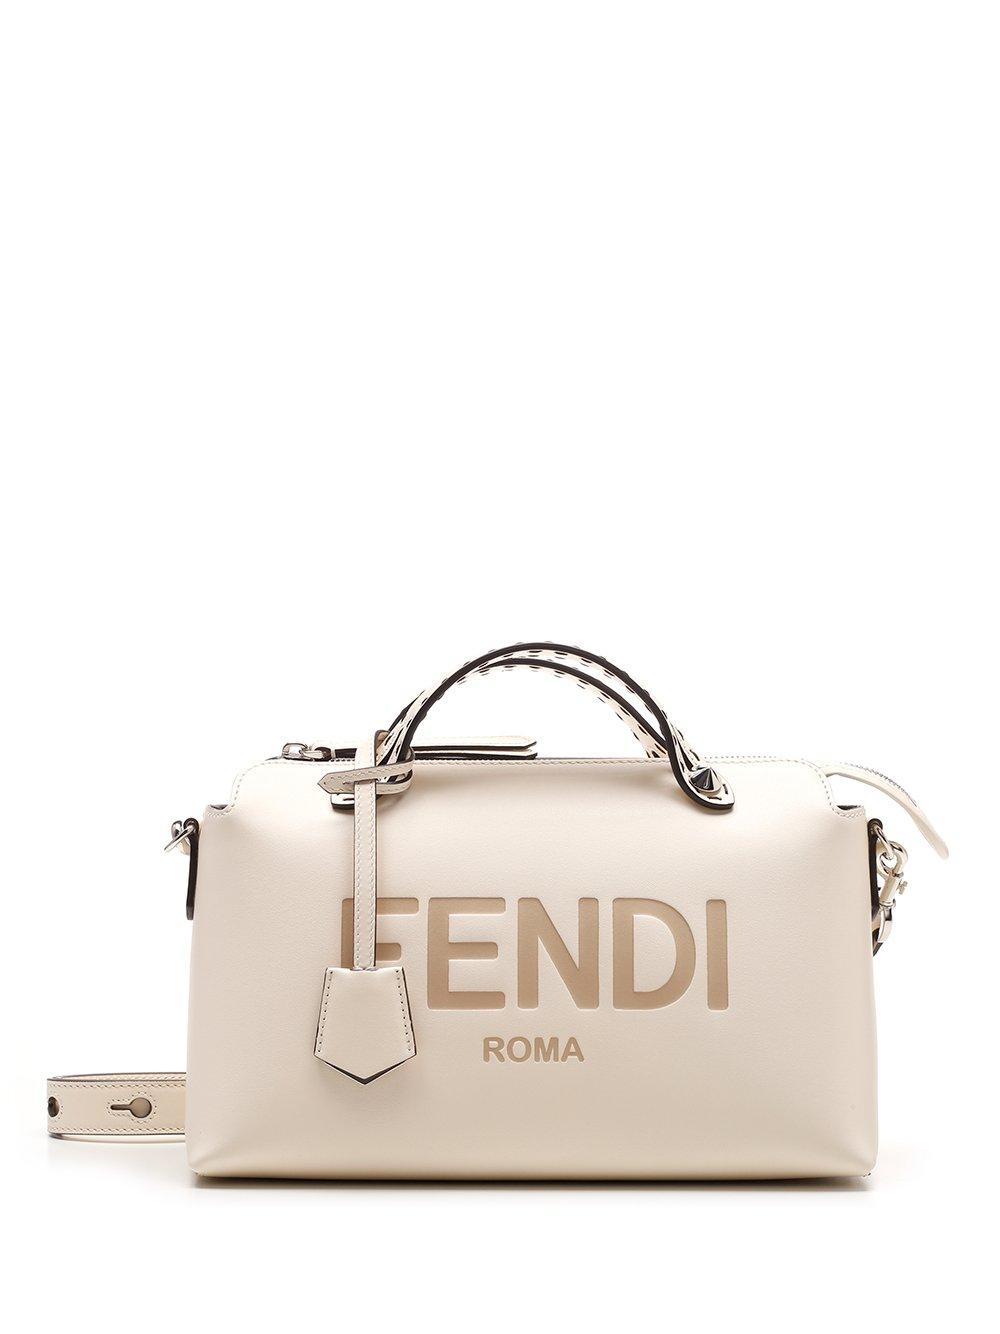 Fendi Leather By The Way Medium Boston Bag in White - Save 14% - Lyst